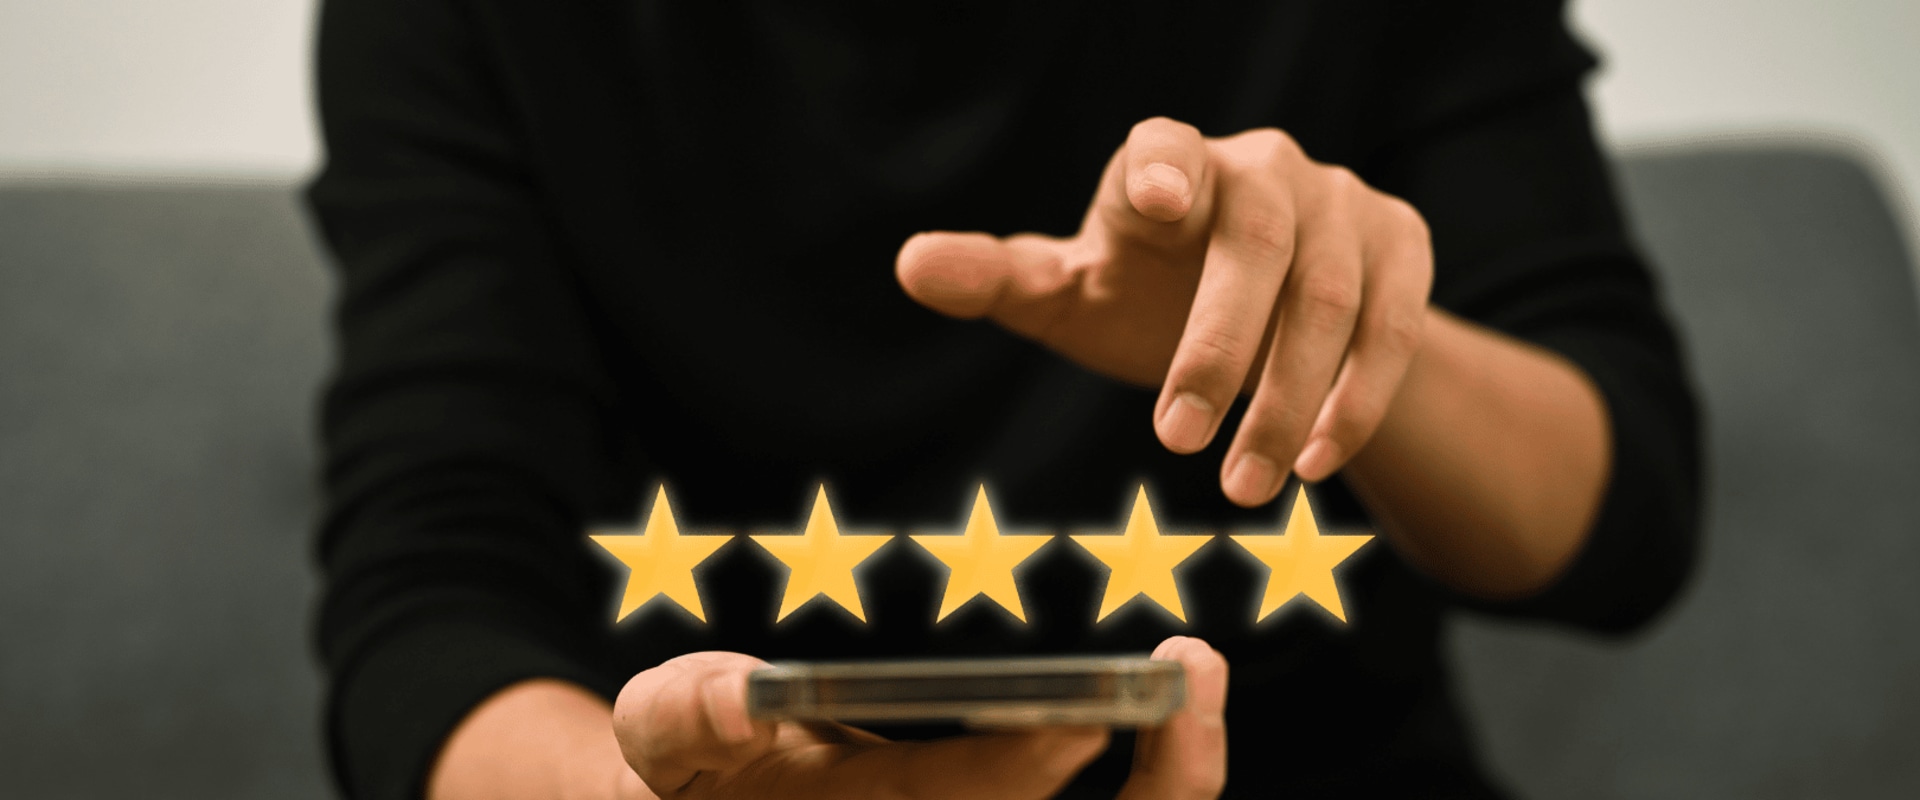 How to Evaluate Product Reviews and Ratings for Optimal Customer Satisfaction